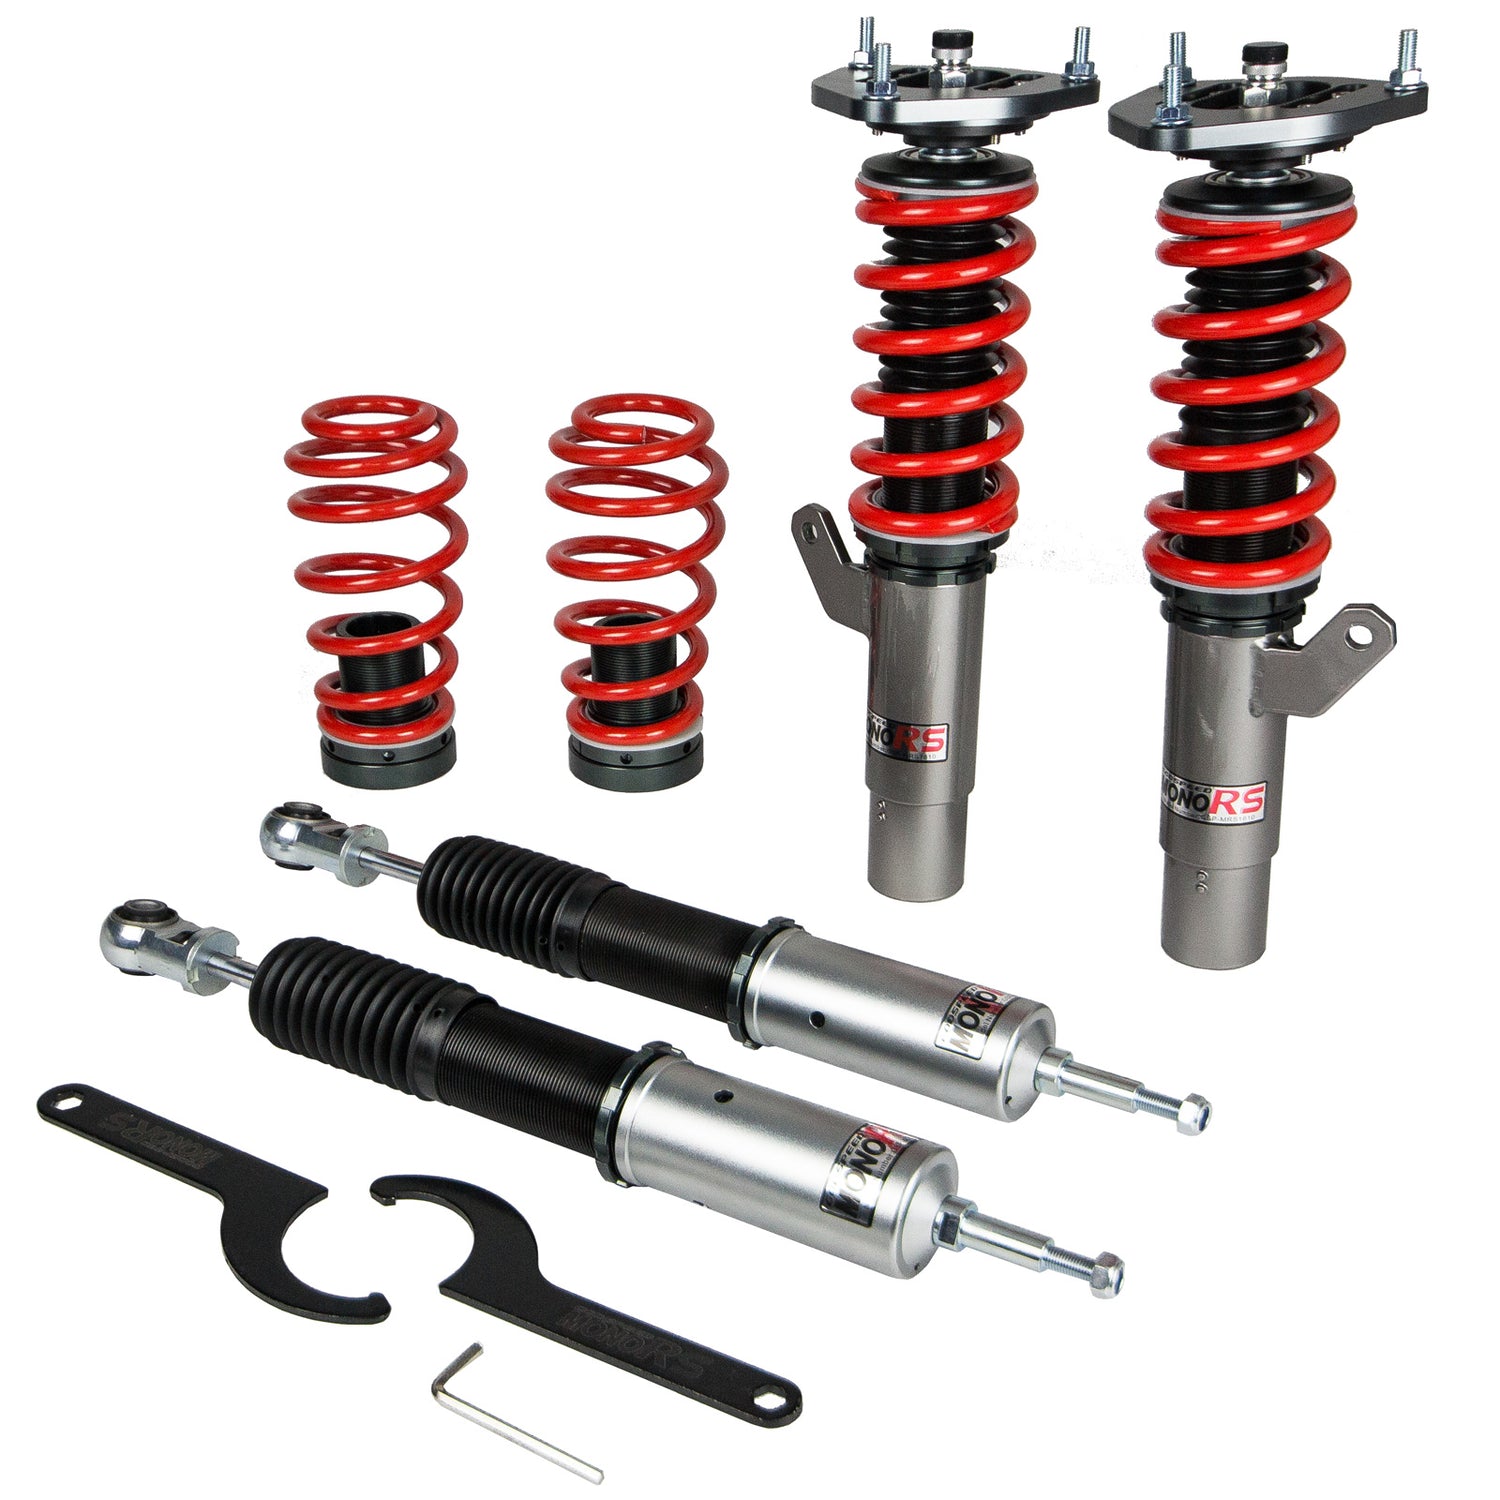 Godspeed MRS1810-A MonoRS Coilover Lowering Kit, 32 Damping Adjustment, Ride Height Adjustable